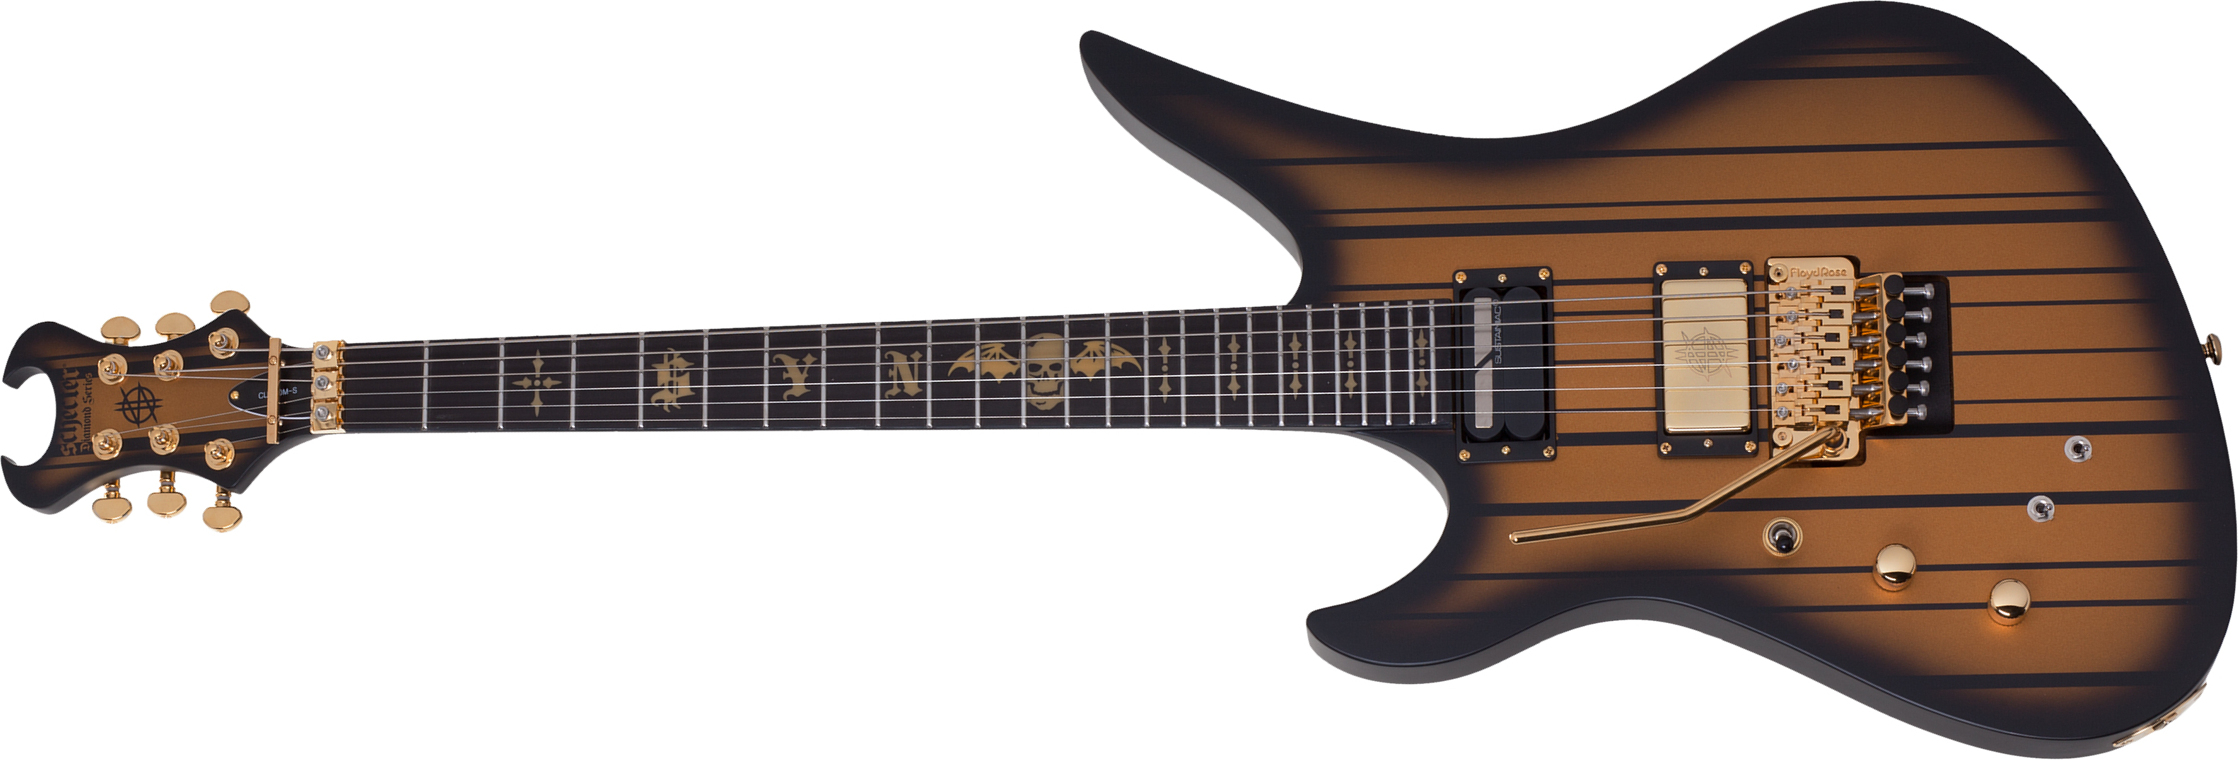 Schecter Synyster Custom-s Lh Signature Gaucher 2h Sustainiac Fr Eb - Satin Gold Burst - Left-handed electric guitar - Main picture